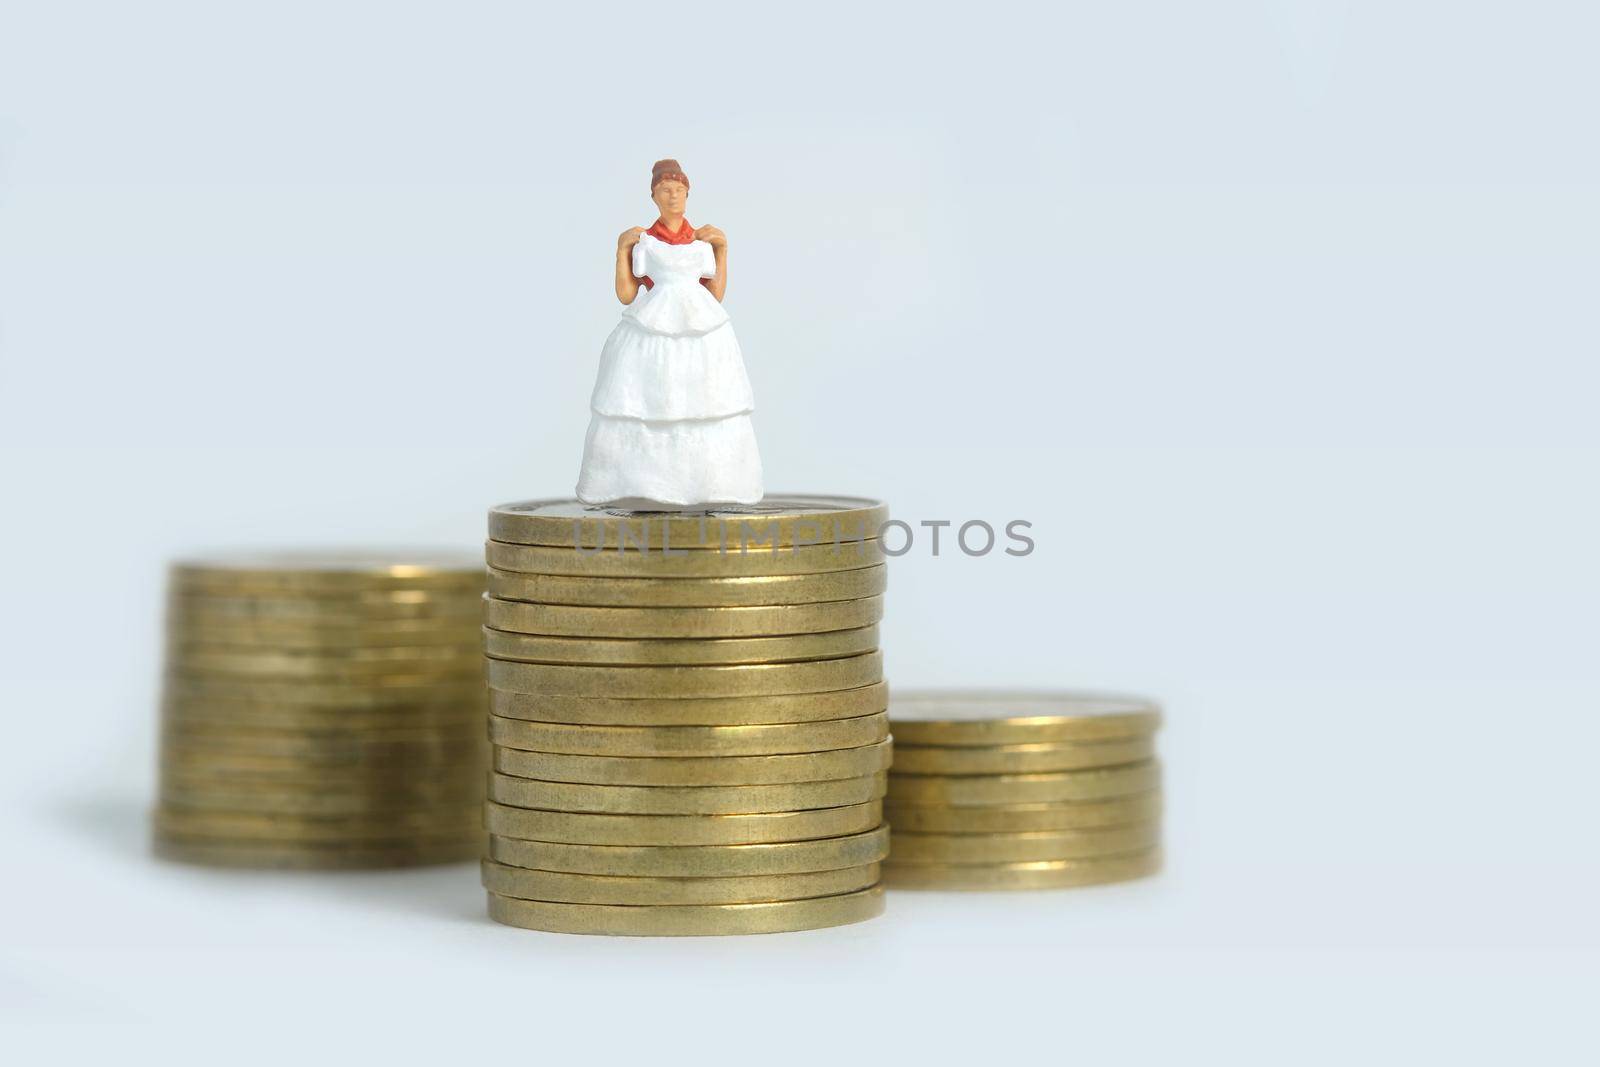 Wedding dress budget for bride, miniature people illustration concept. Woman standing above coin money stack. Image photo